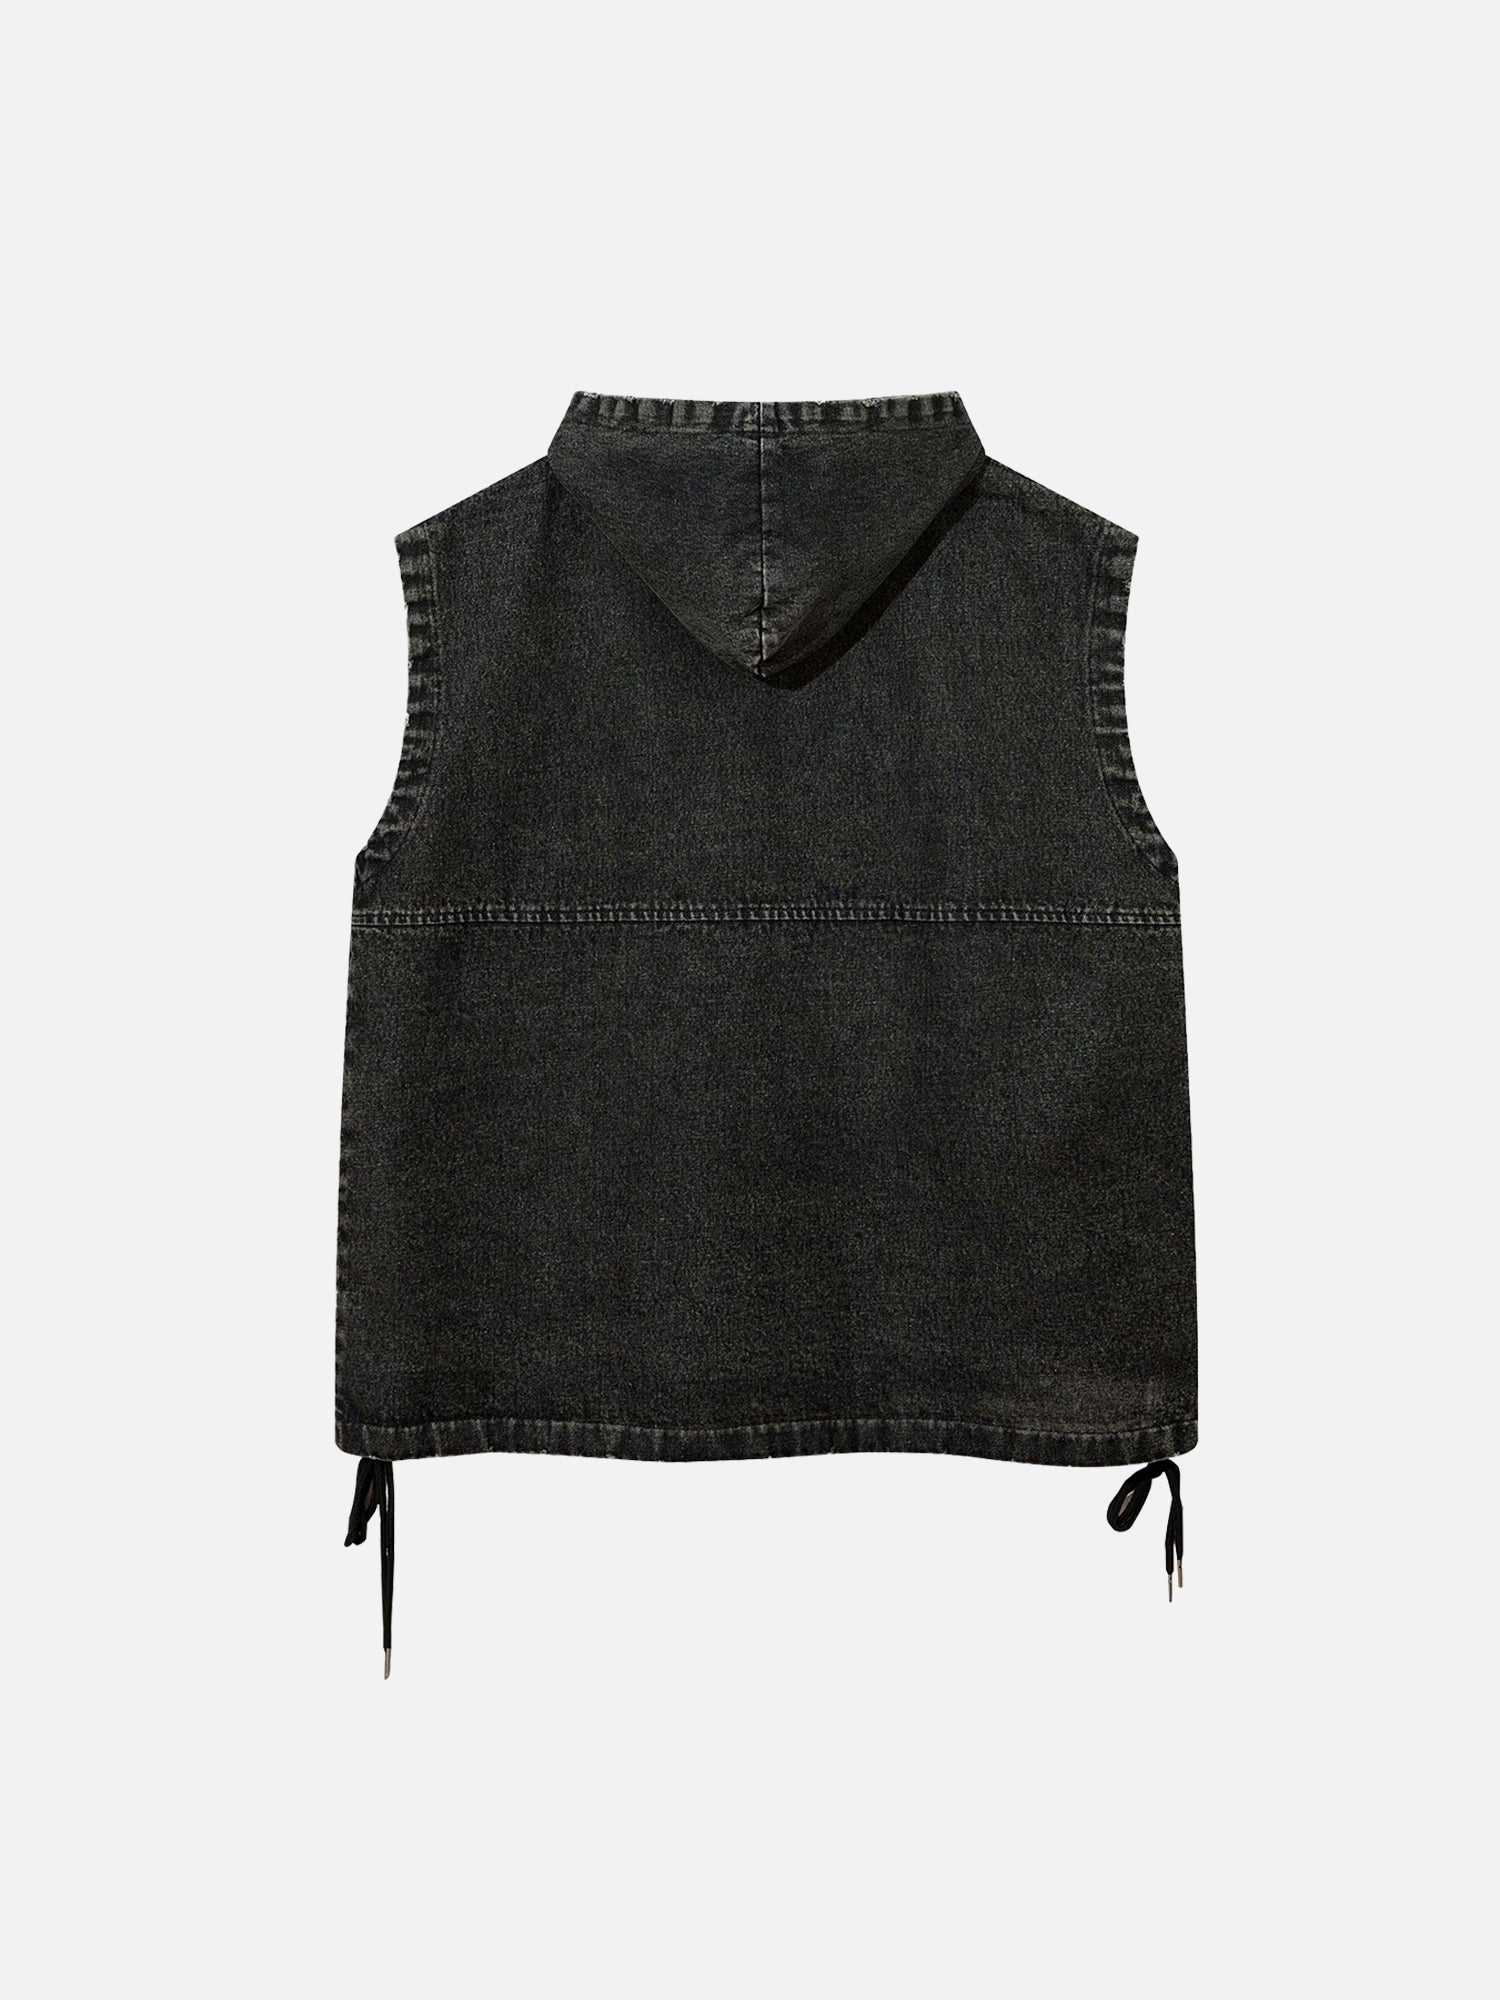 Thesupermade American Fashion Brand Washed Distressed Vest